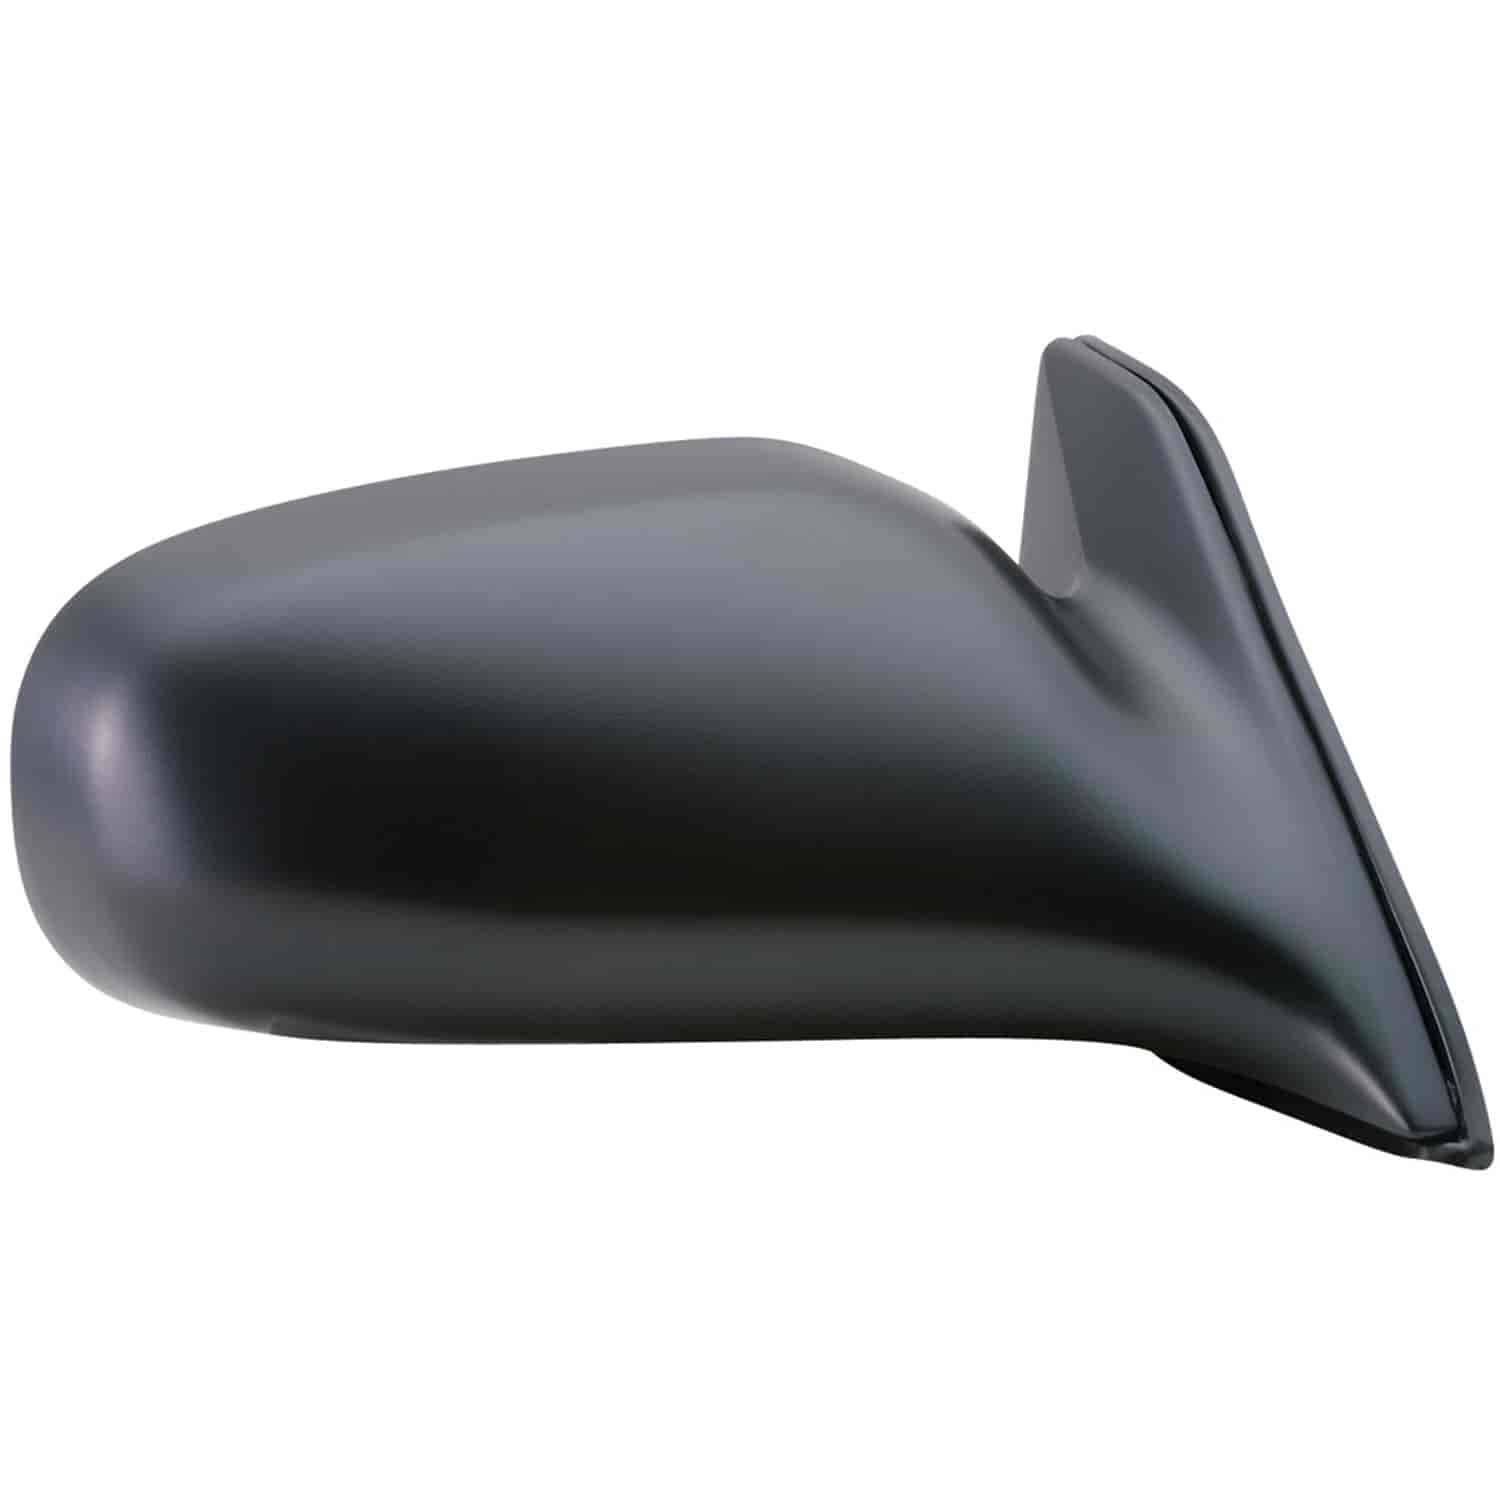 OEM Style Replacement mirror for 95-99 Toyota Tercel 2/4 door passenger side mirror tested to fit an